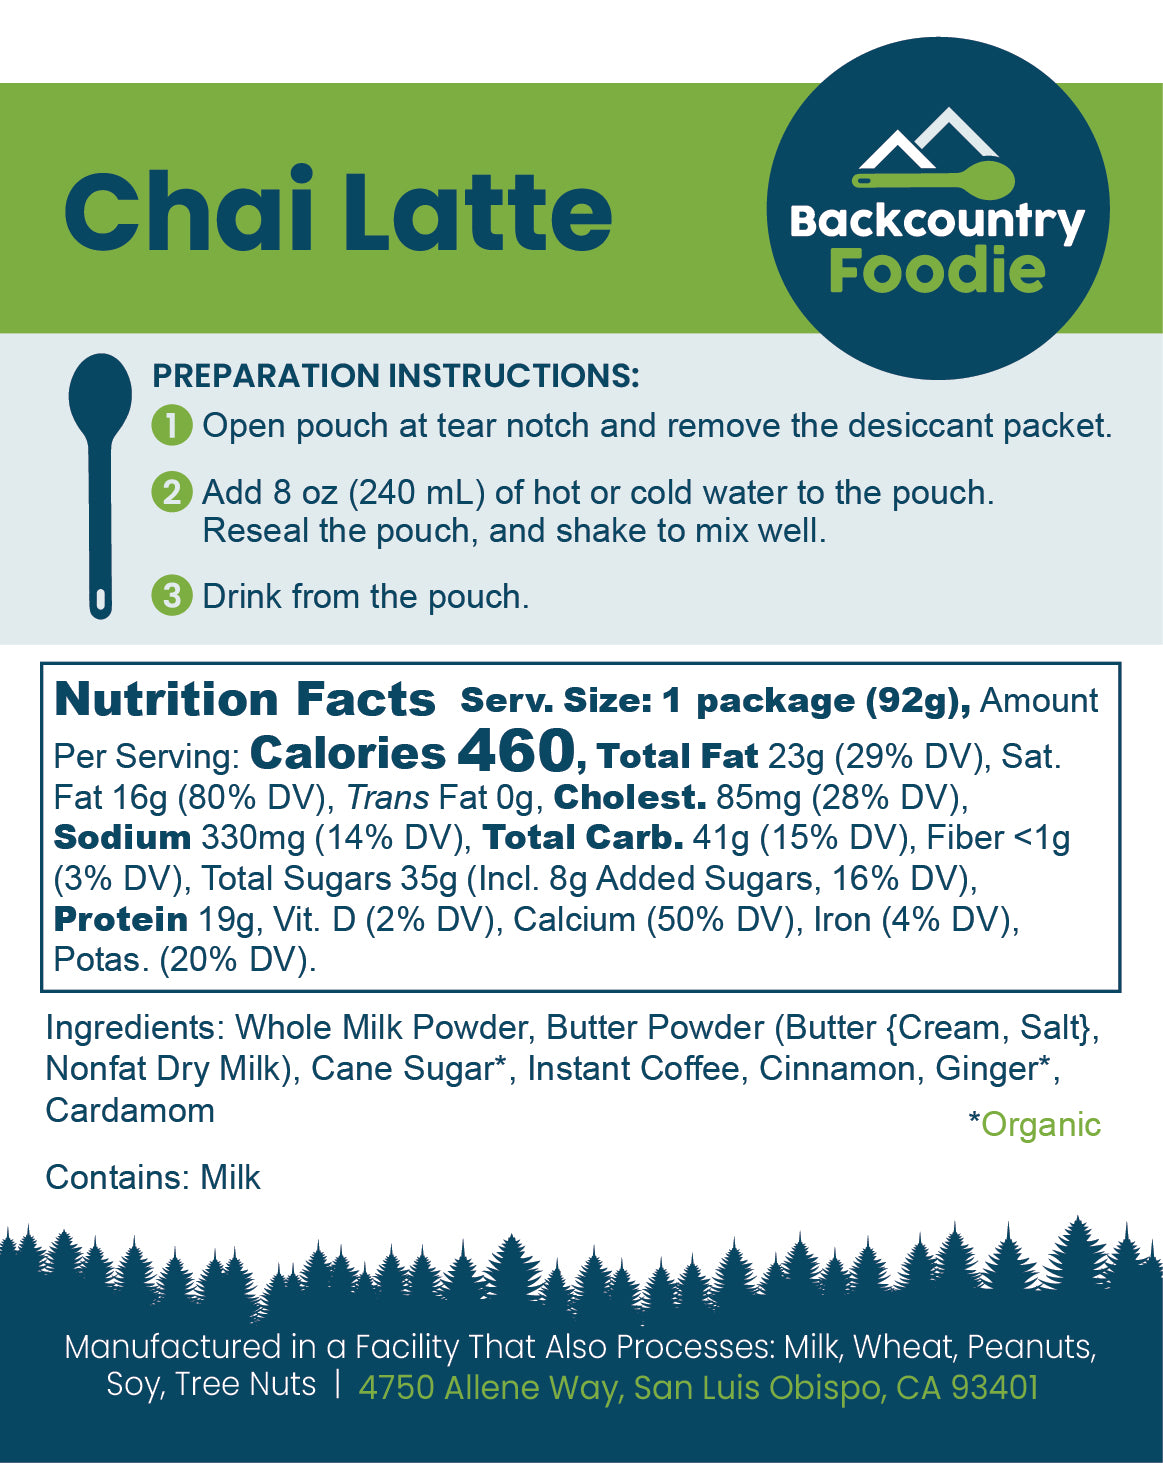 Backcountry Foodie - Chai Latte